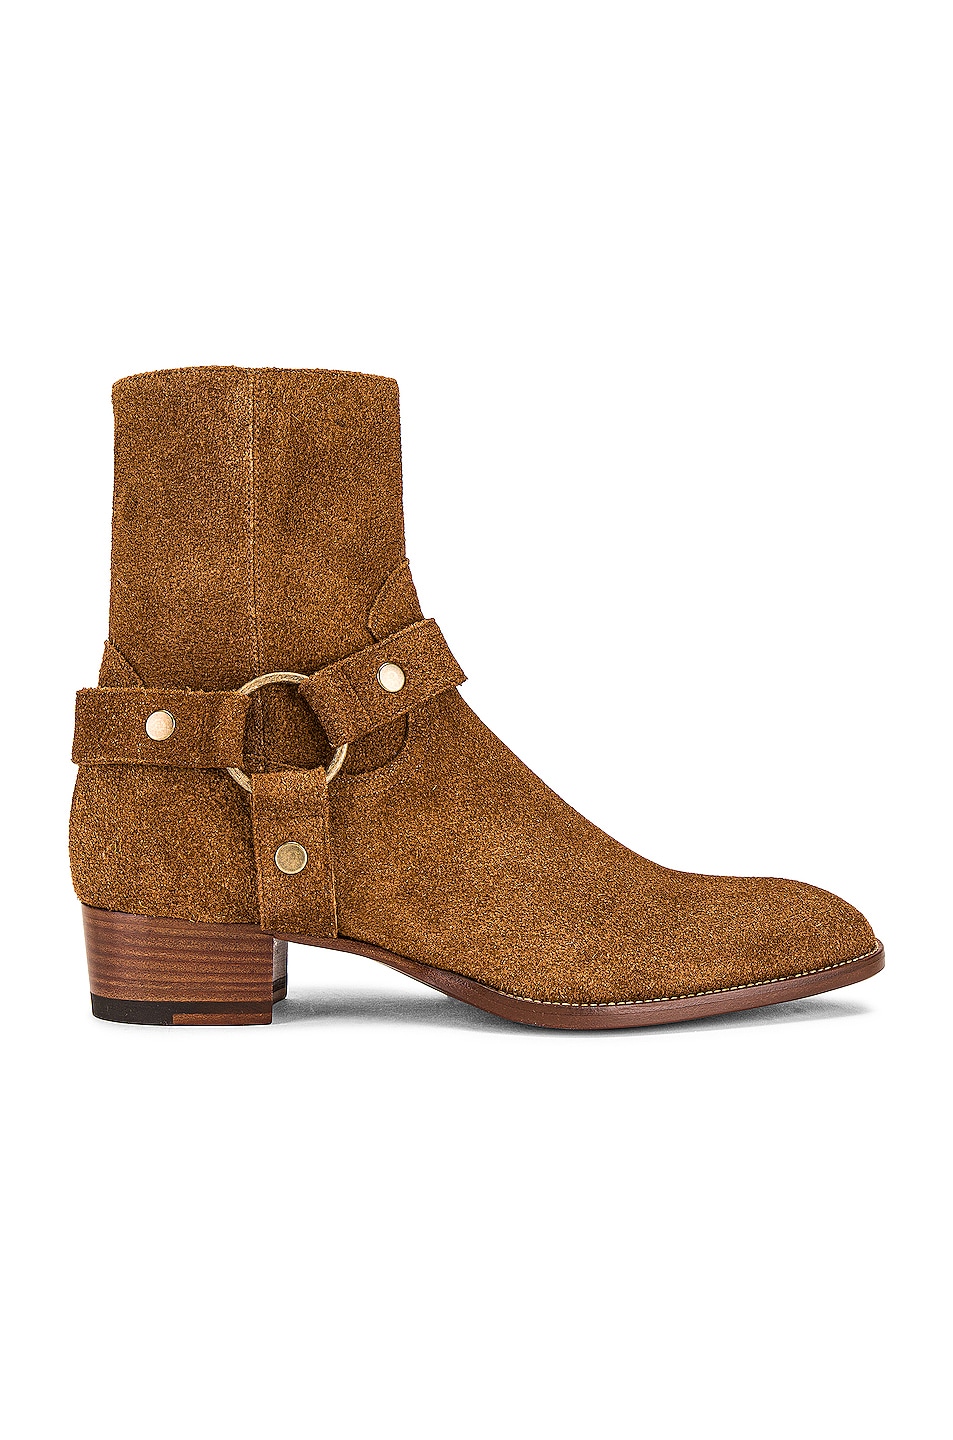 Wyatt Leather Boot in Brown